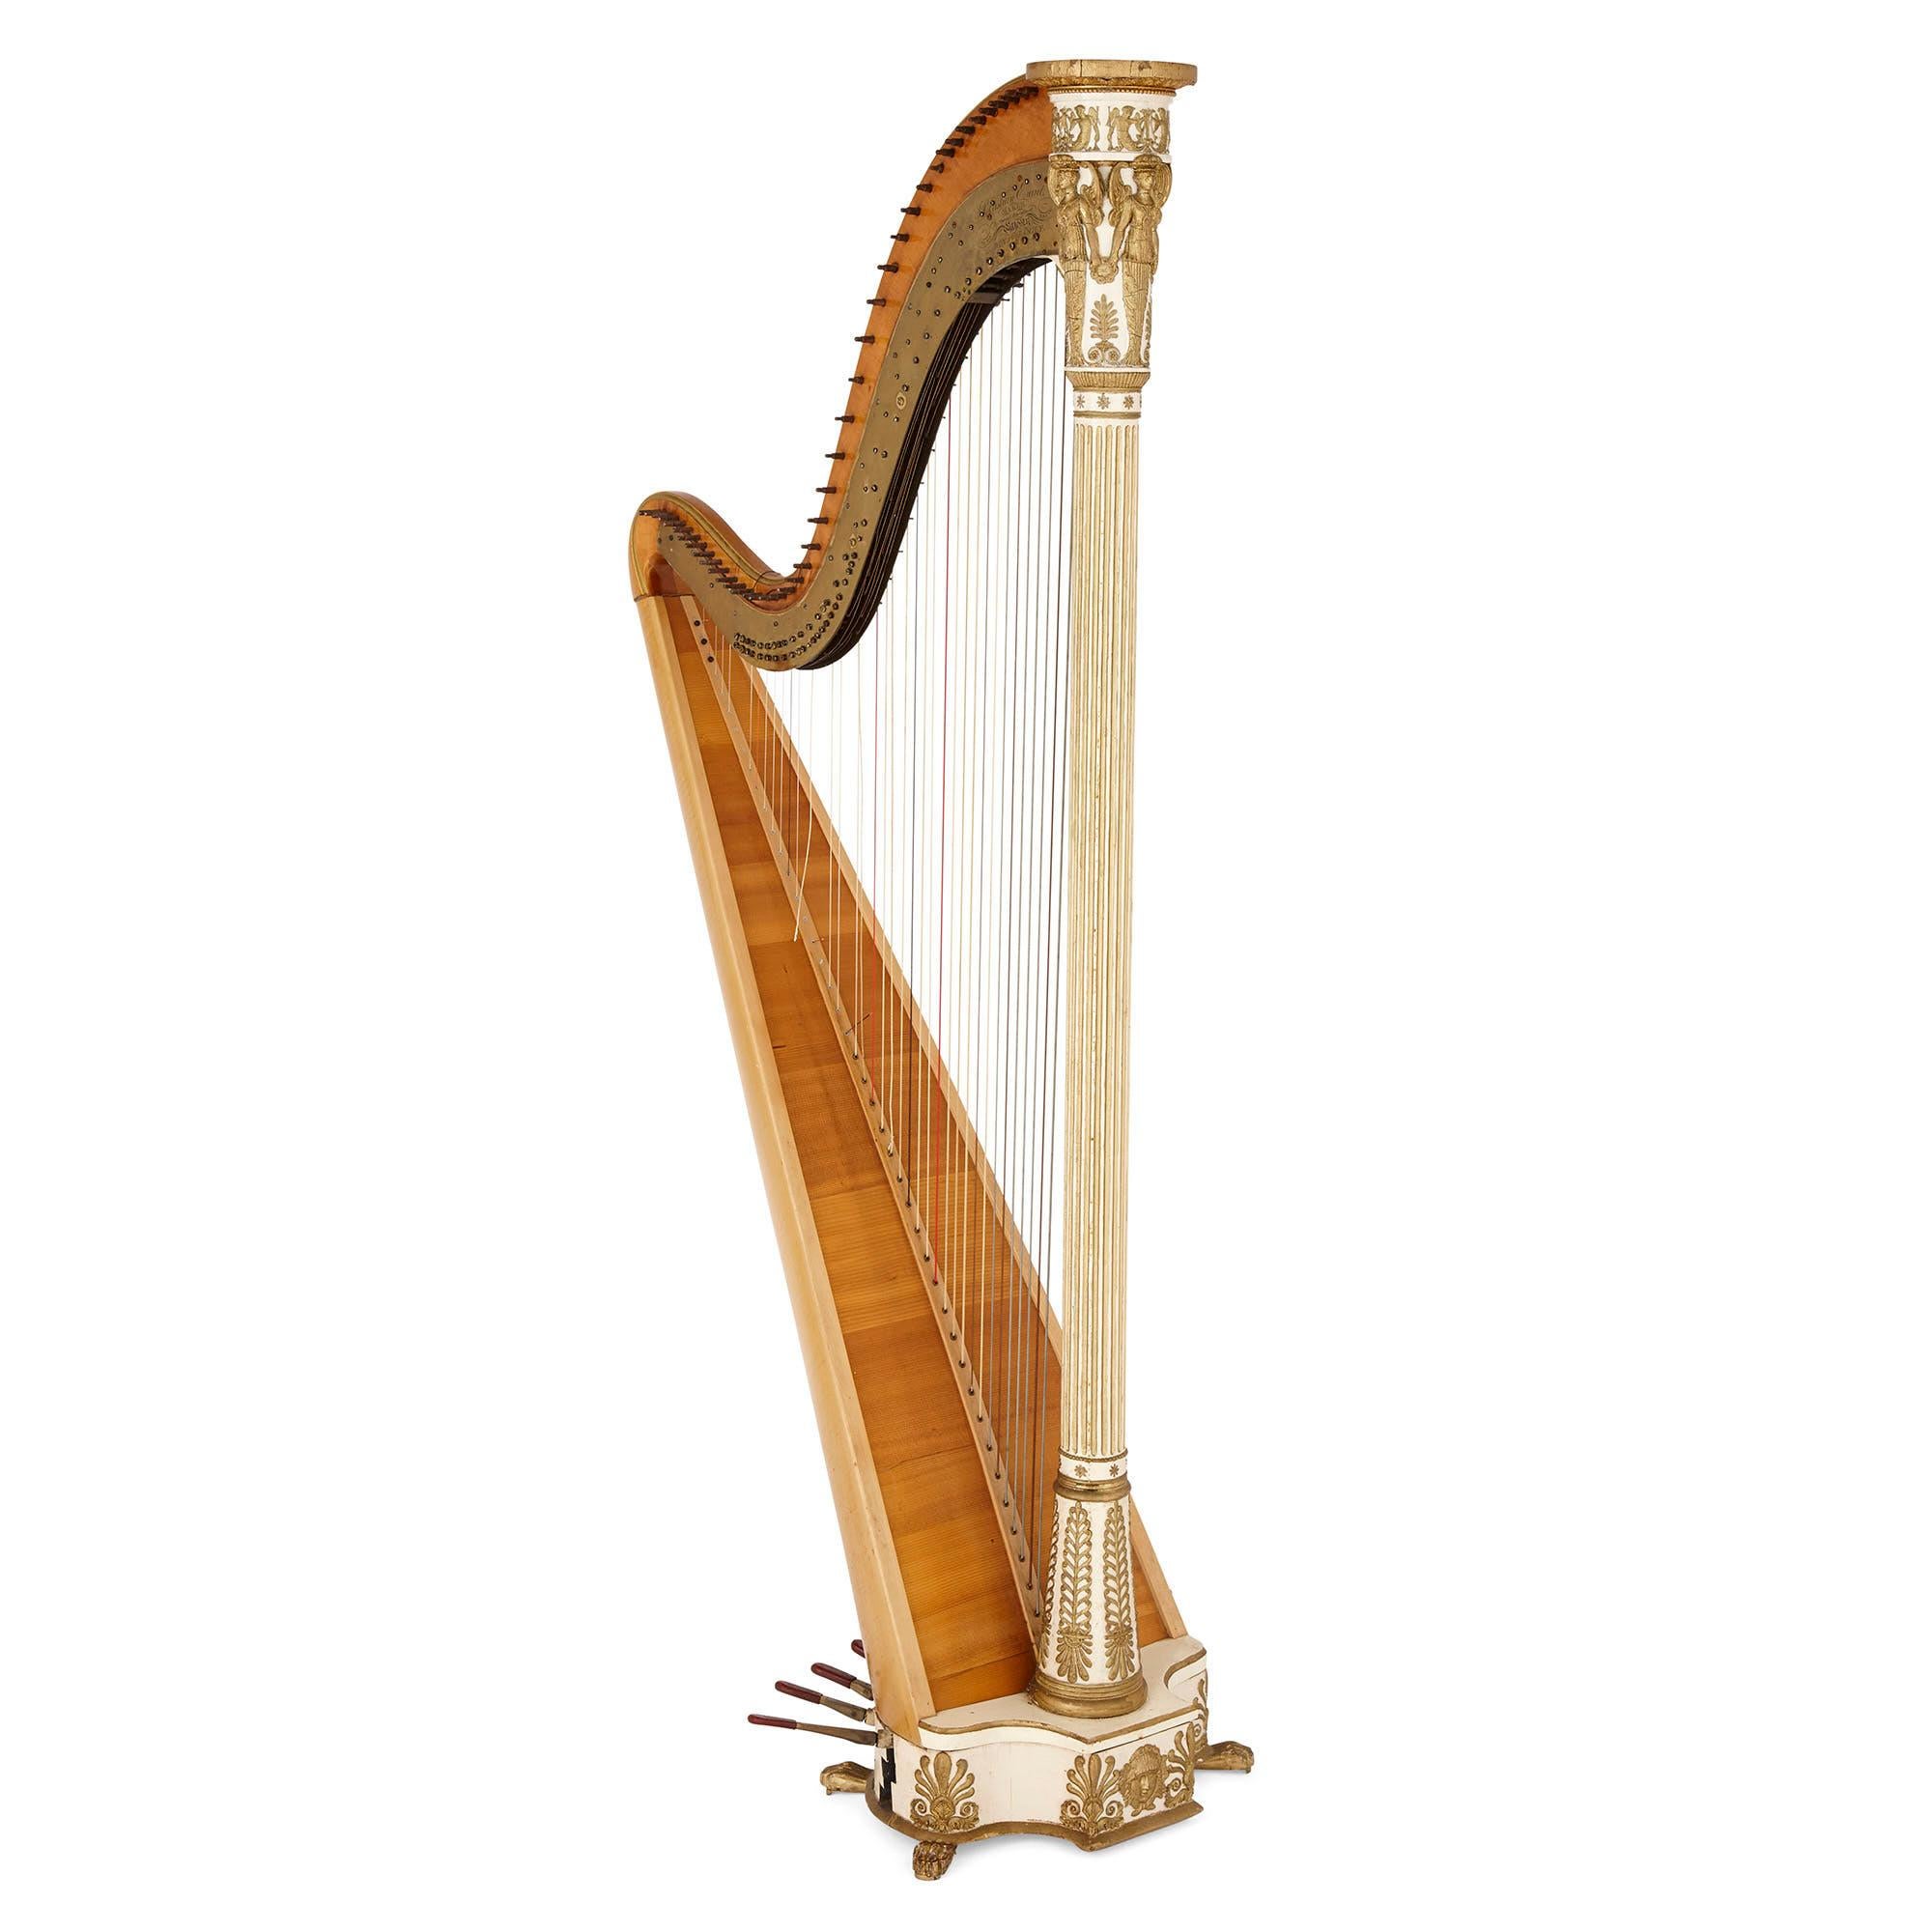 This impressive harp by the French maker Érard is stylistically ‘Grecian’, its decorative motifs being drawn largely from Greco-Roman precedents. The Classical influences can be seen in its gilt fluted column, the moulded palmettes present